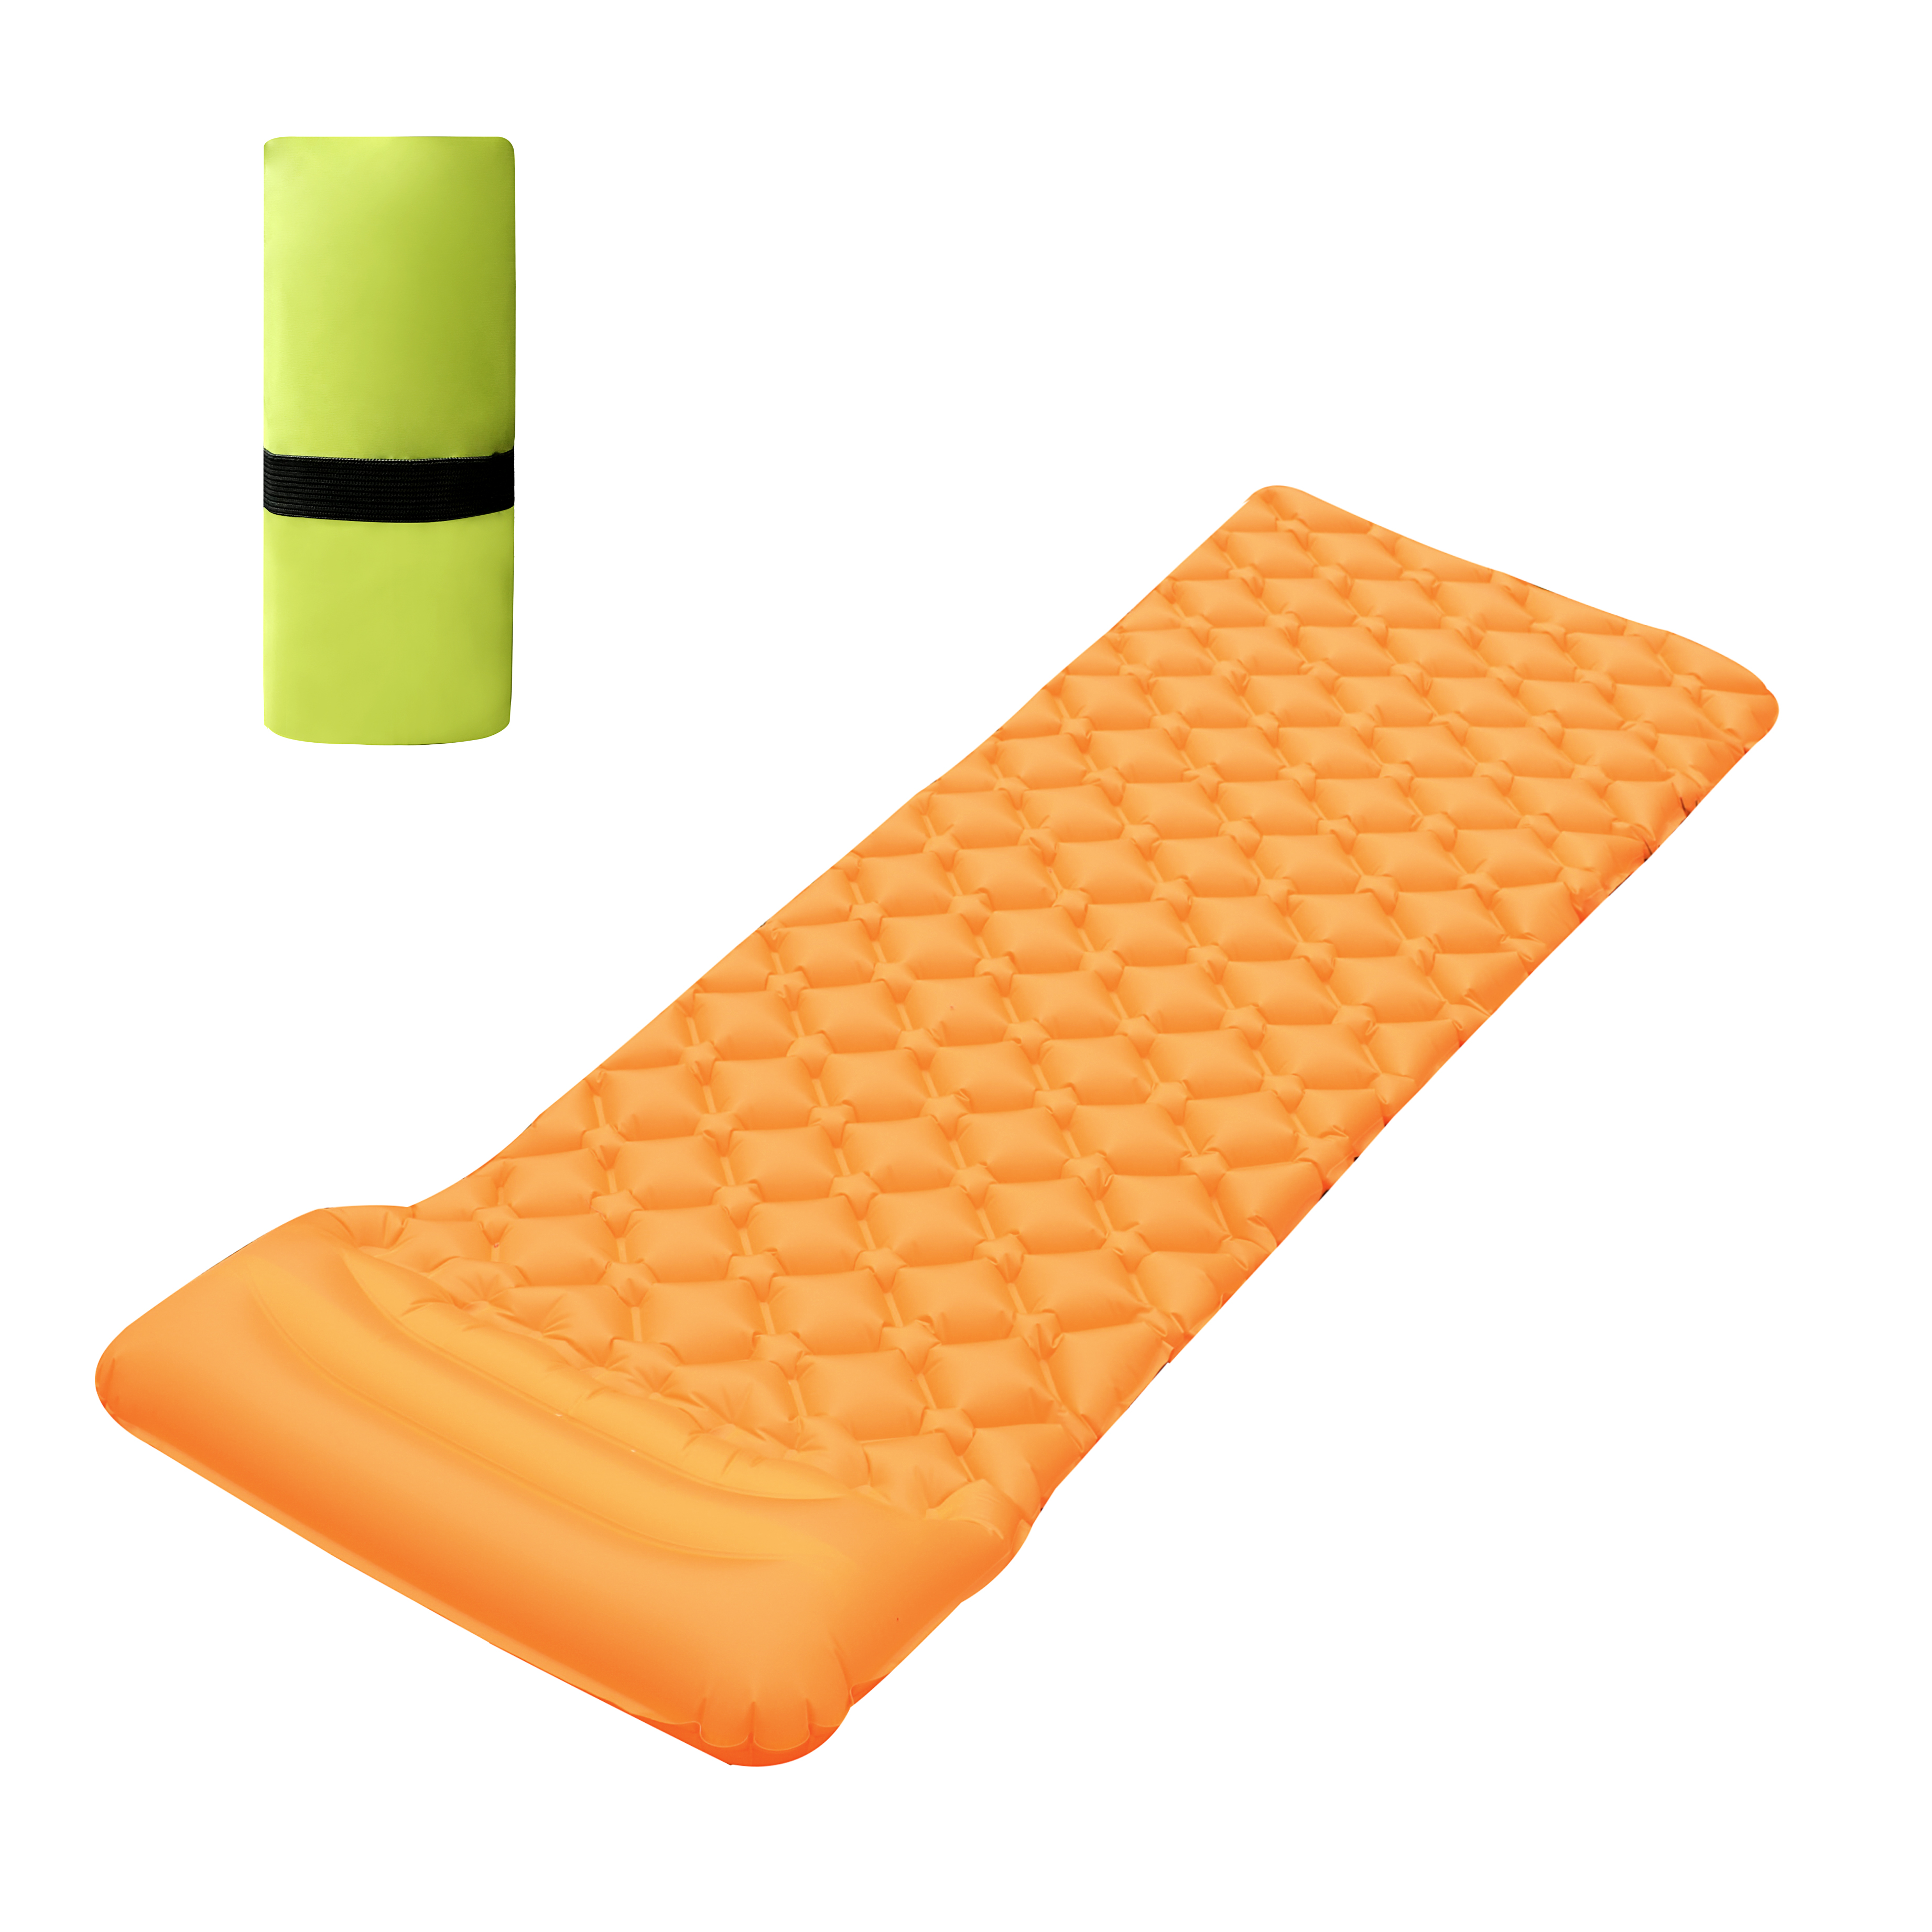 Inflatable Sleeping Pad for camping